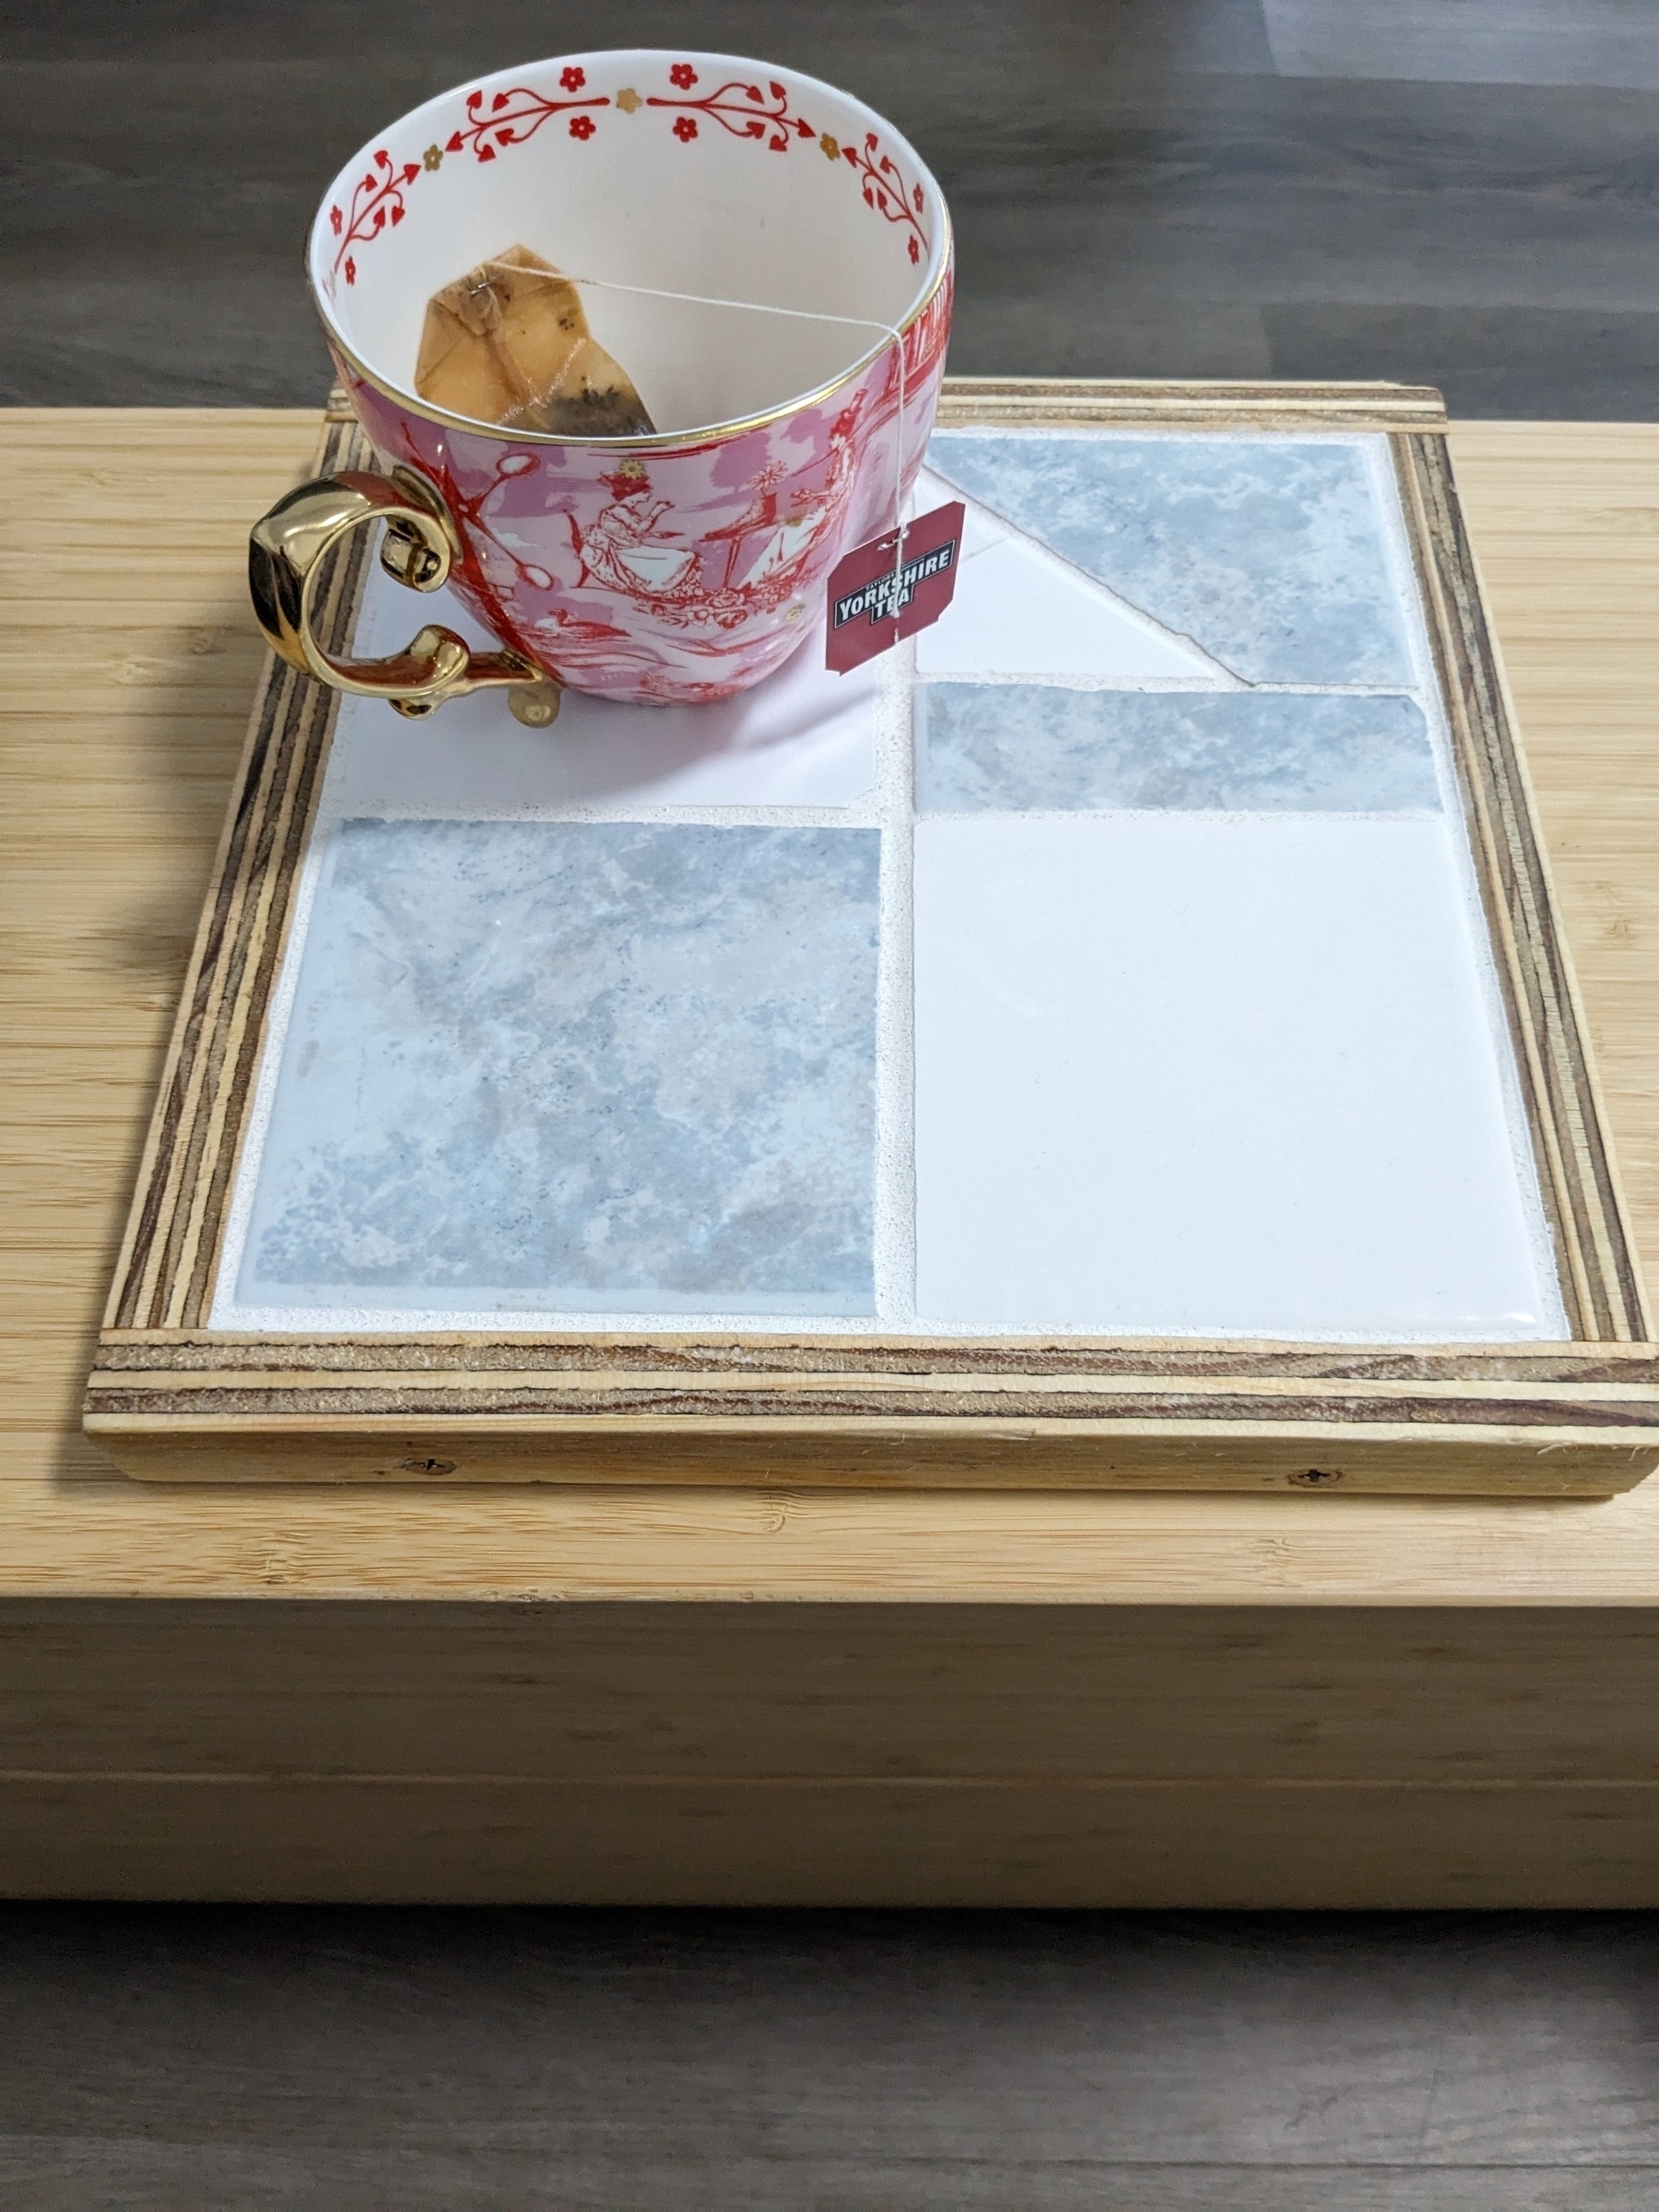 Handmade wooden and tiled coaster! Has a pink oversized teacup on it. 